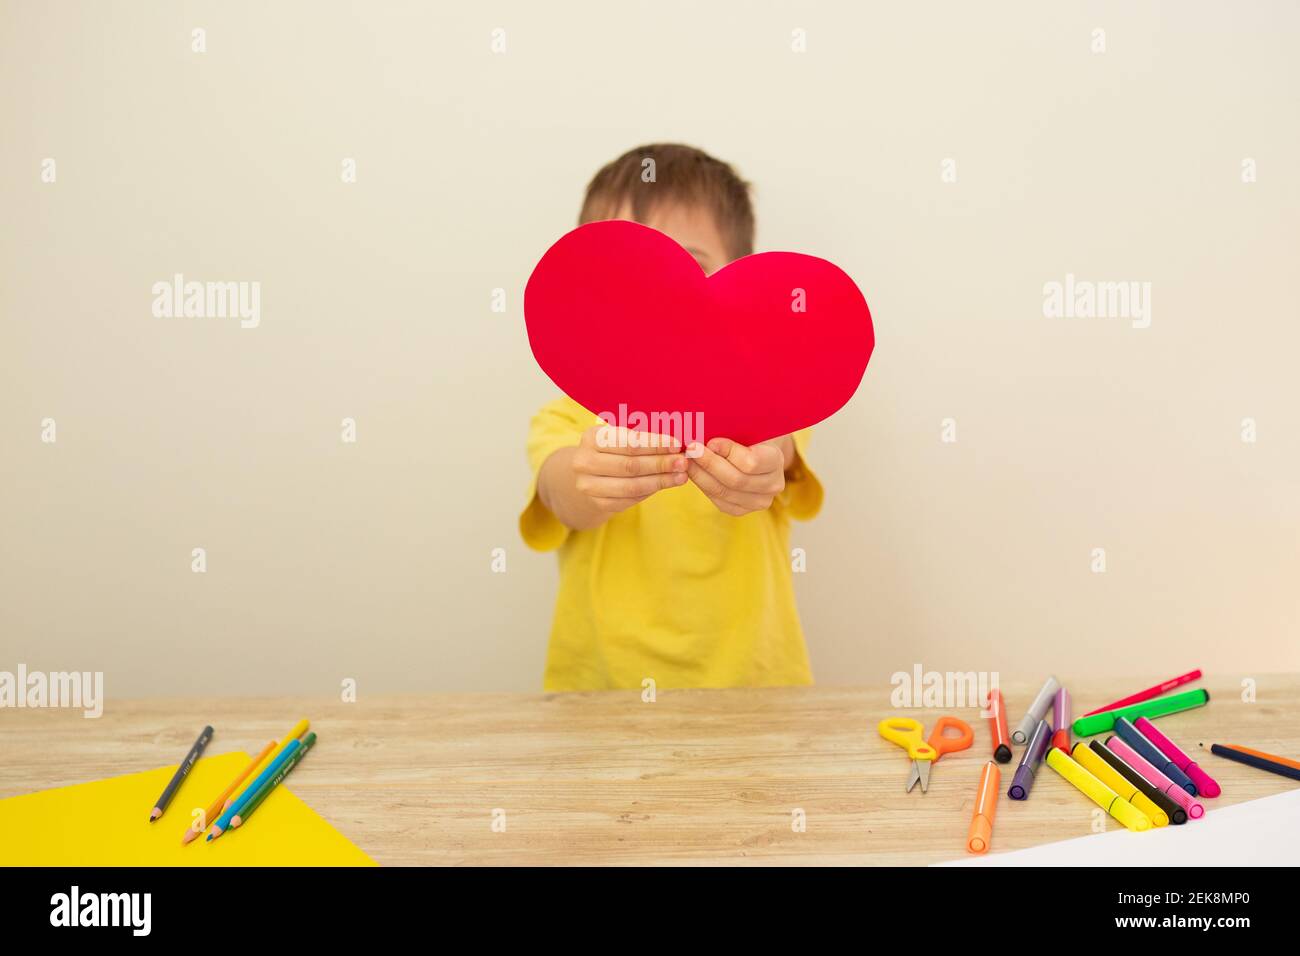 Little boy holding a red heart made of colored paper, covering his face. Concept for March 8, Mother's Day. Postcard Stock Photo